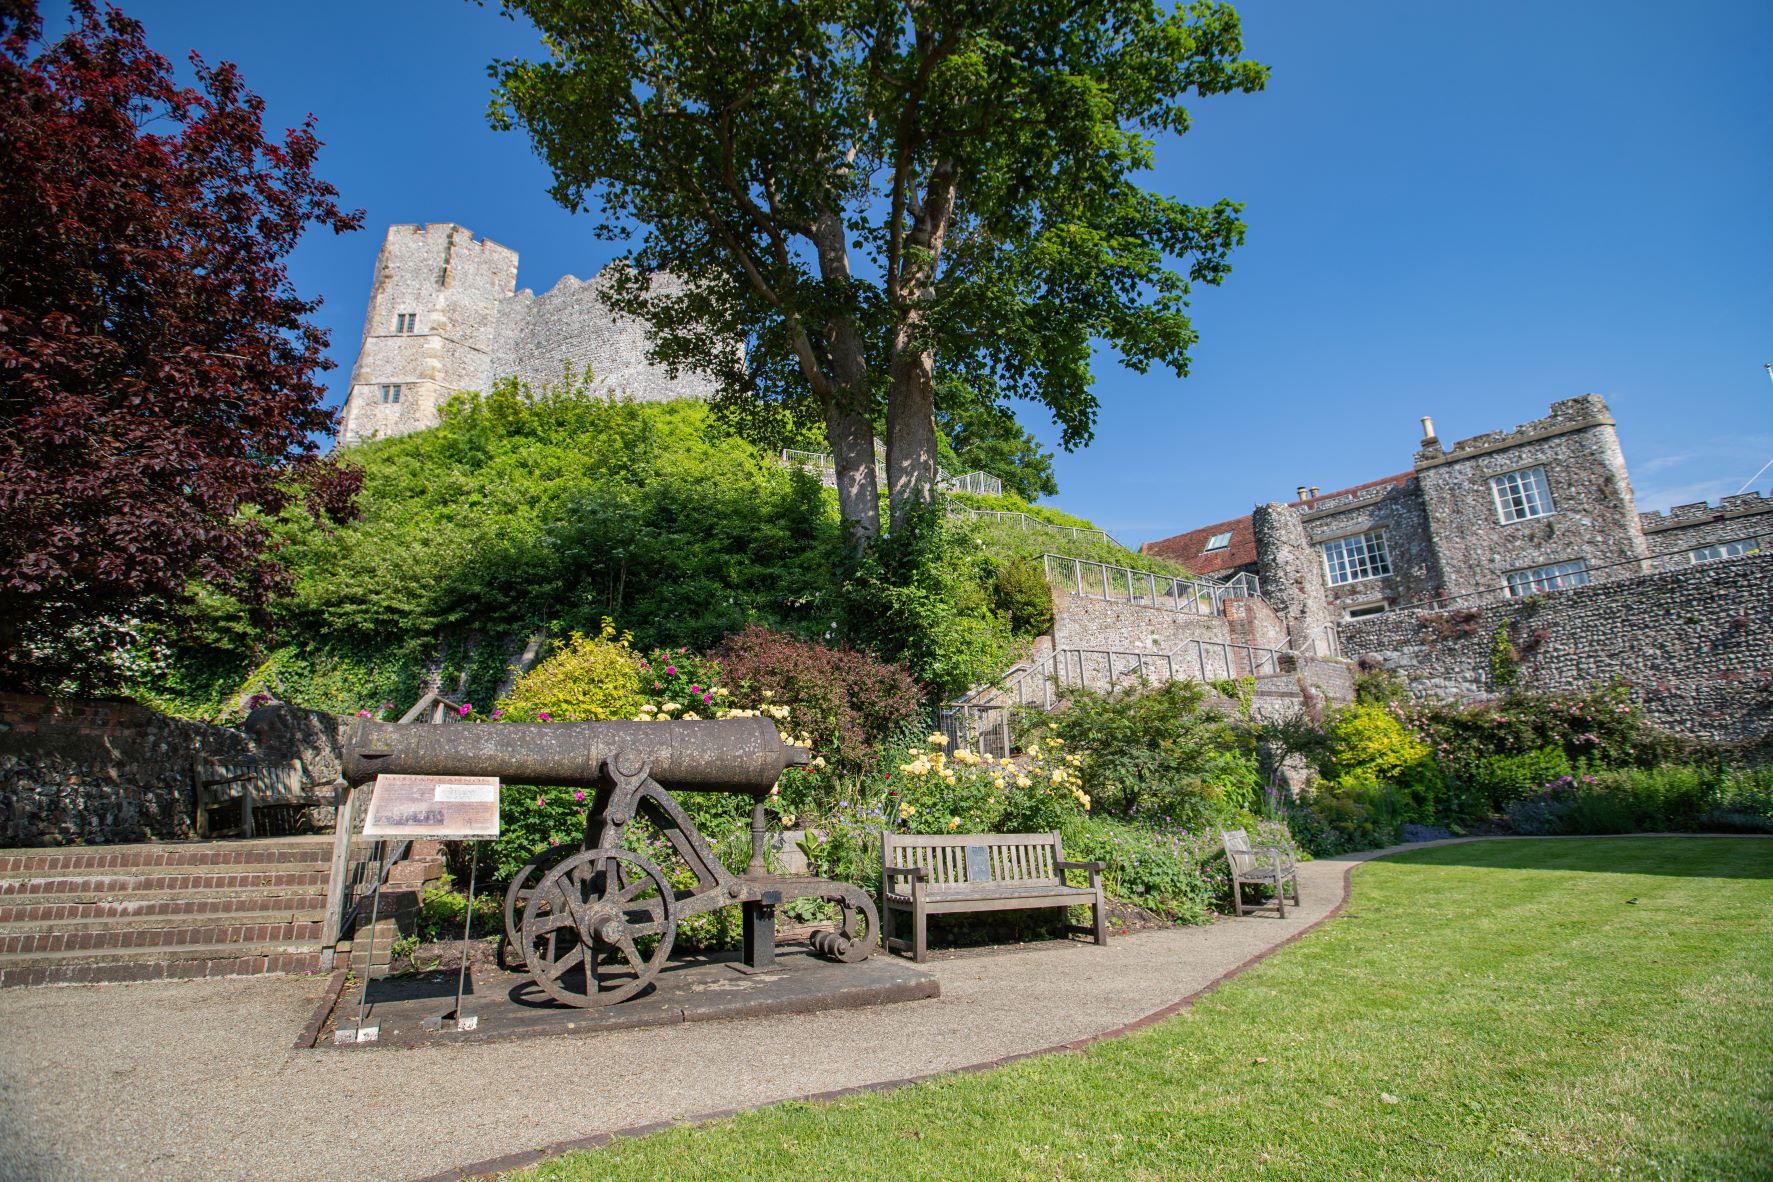 Pay once to Lewes Castle and get an annual pass